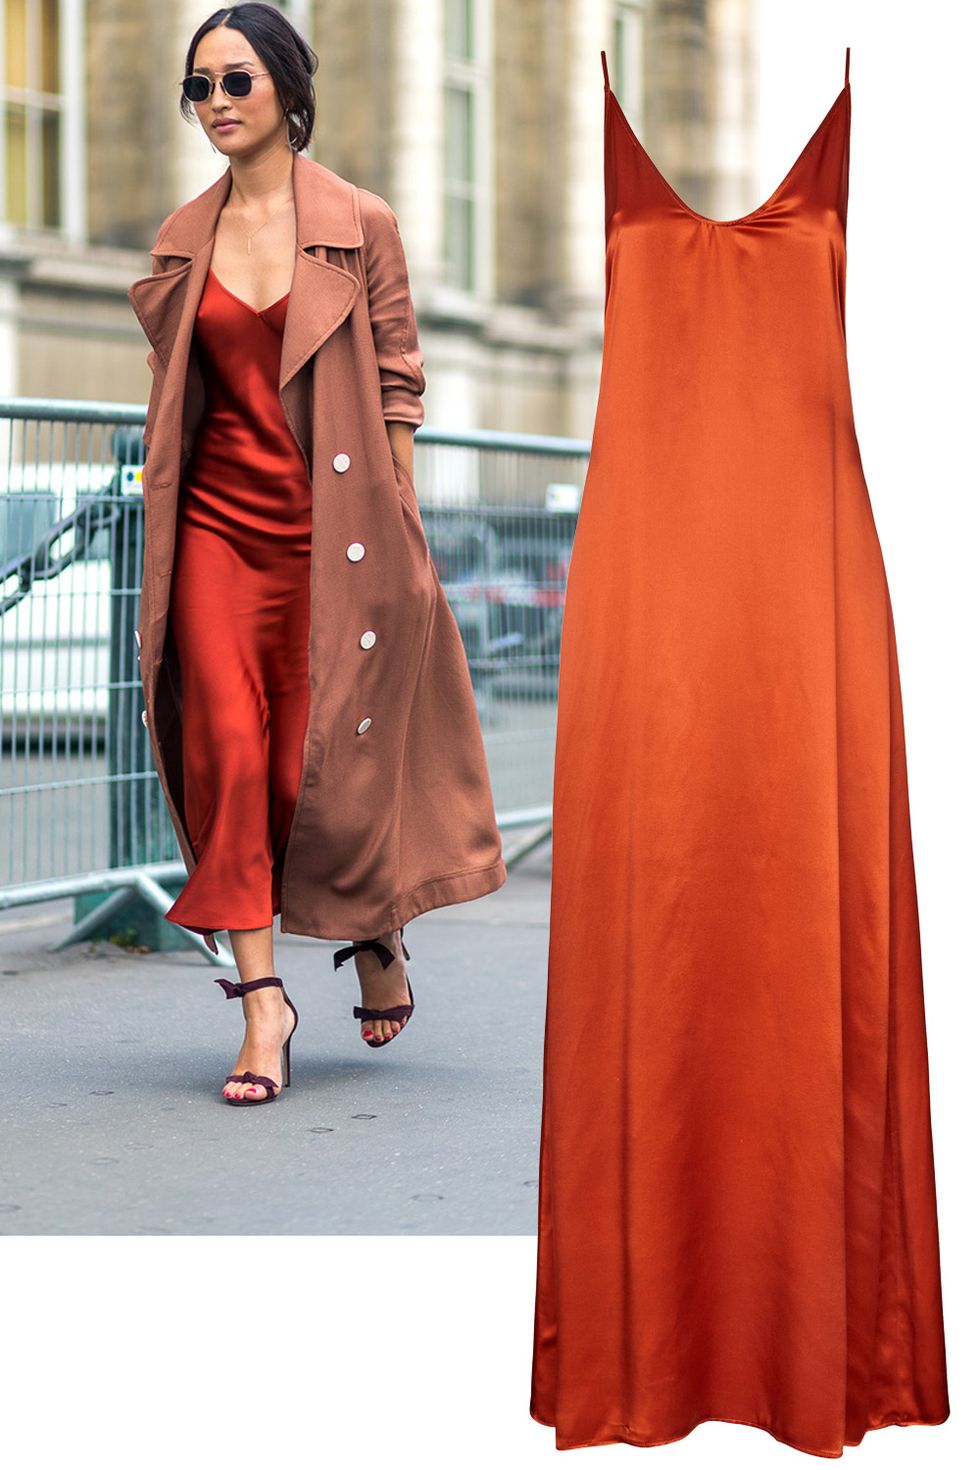 <p>Who: Nicole Warne</p><p>What: A slip dress is first-date sultry, off-set by an oversized trench.</p><p><em data-redactor-tag="em" data-verified="redactor">Staud dress,&nbsp;$275</em><span class="redactor-invisible-space" data-verified="redactor" data-redactor-tag="span" data-redactor-class="redactor-invisible-space"><em data-redactor-tag="em" data-verified="redactor">, <a href="https://staud.clothing/product/2328" target="_blank">staud.clothing.com</a>.</em></span></p>